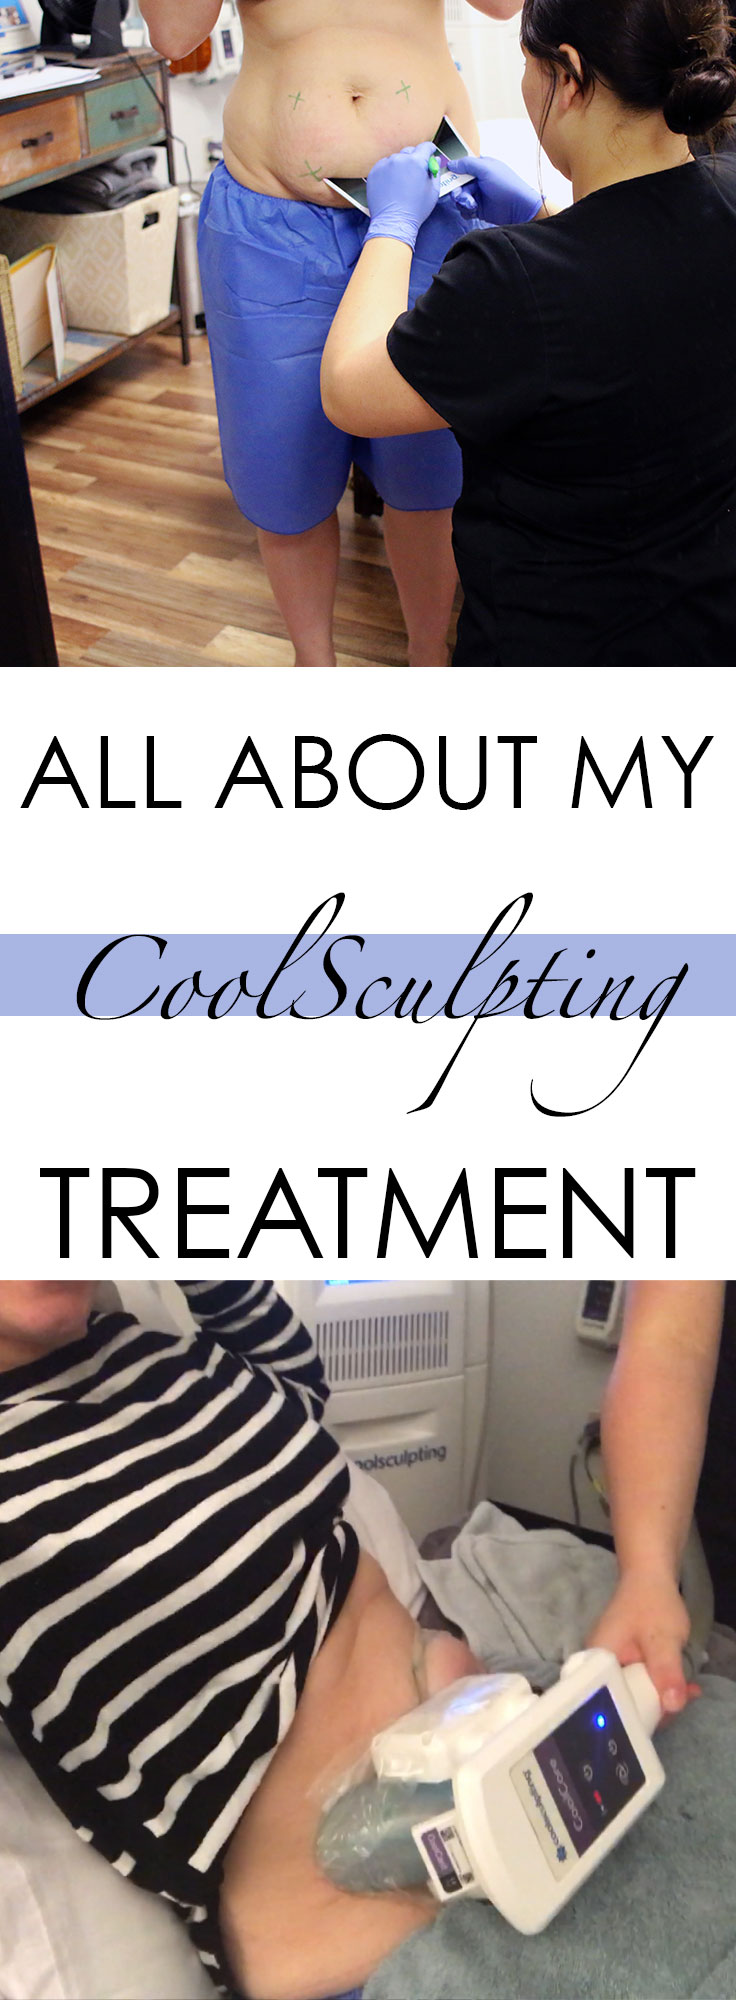 Complimentary Coolsculpting Consultation Day November 19: Holly